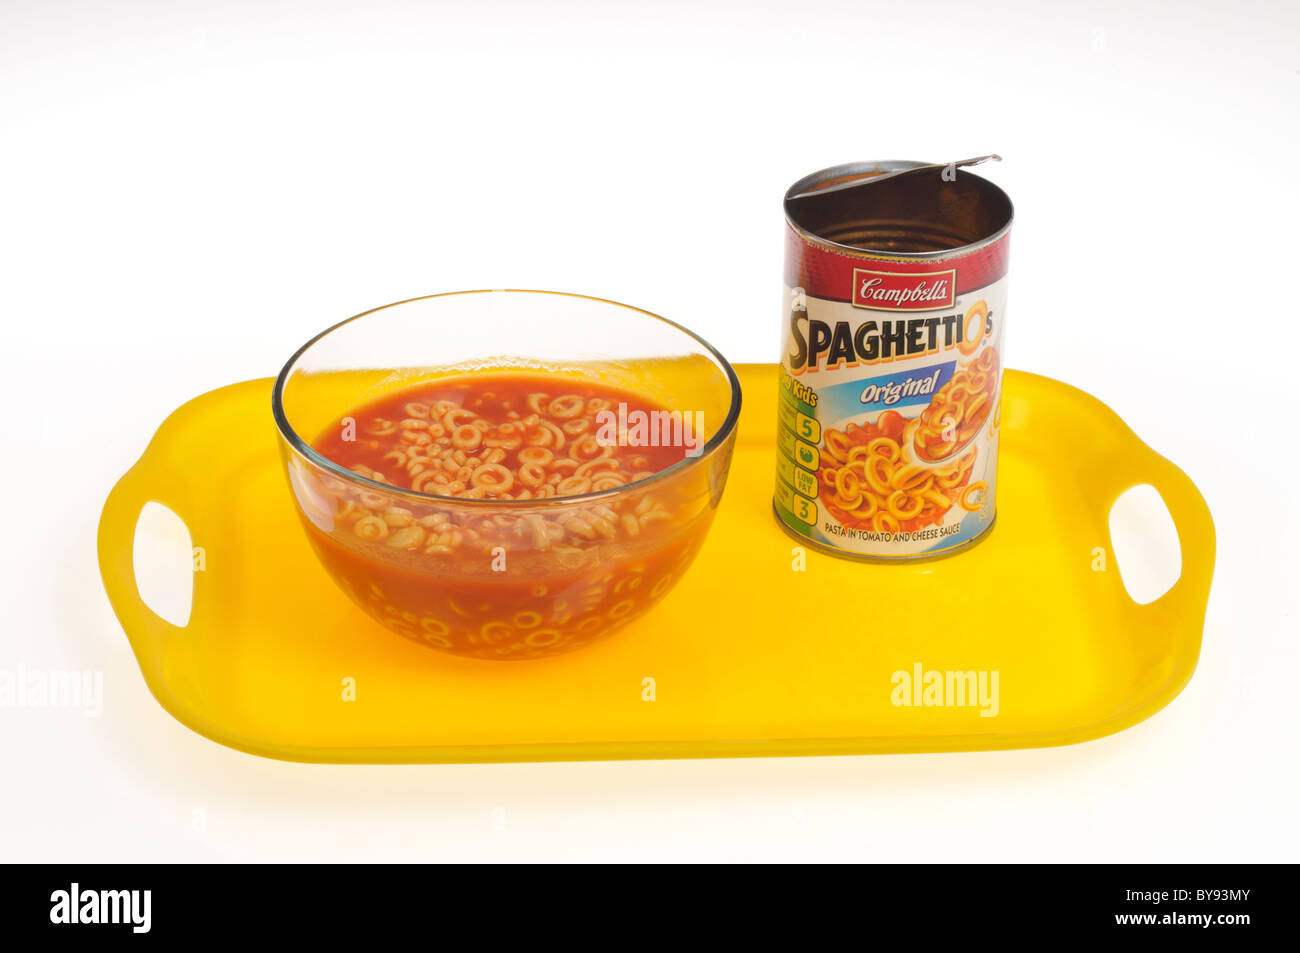 Bowl of Spaghetti-O's with tomato  sauce on tray with open can of Spaghetti-O's on white background, cut out. Stock Photo